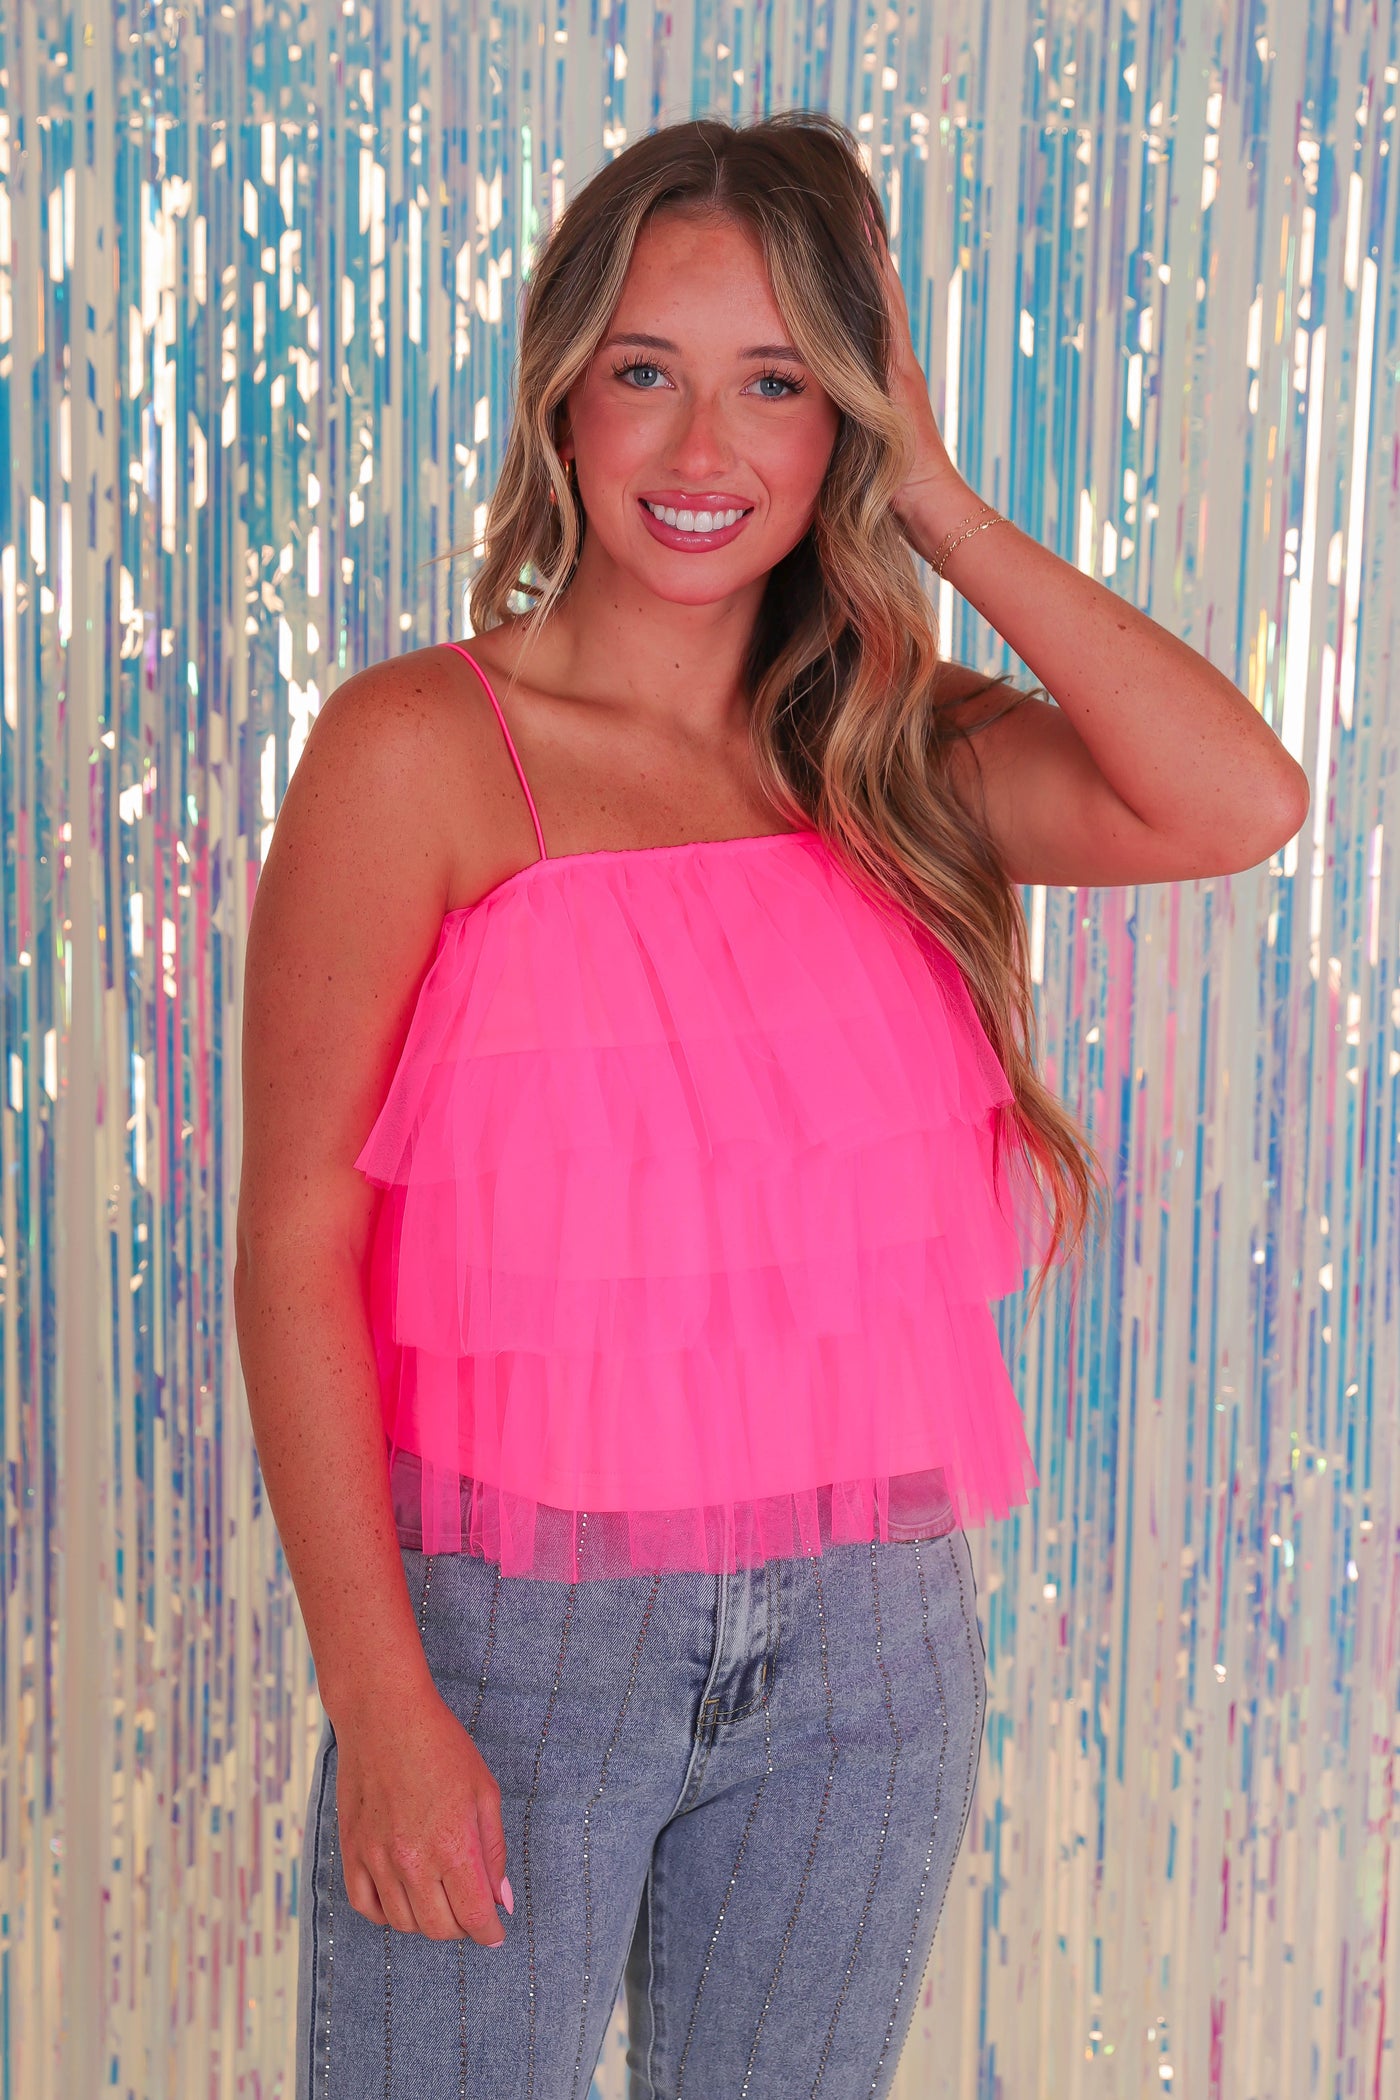 Neon Pink Tulle Top- Women's Fun Tulle Top- GLAM Pink Top